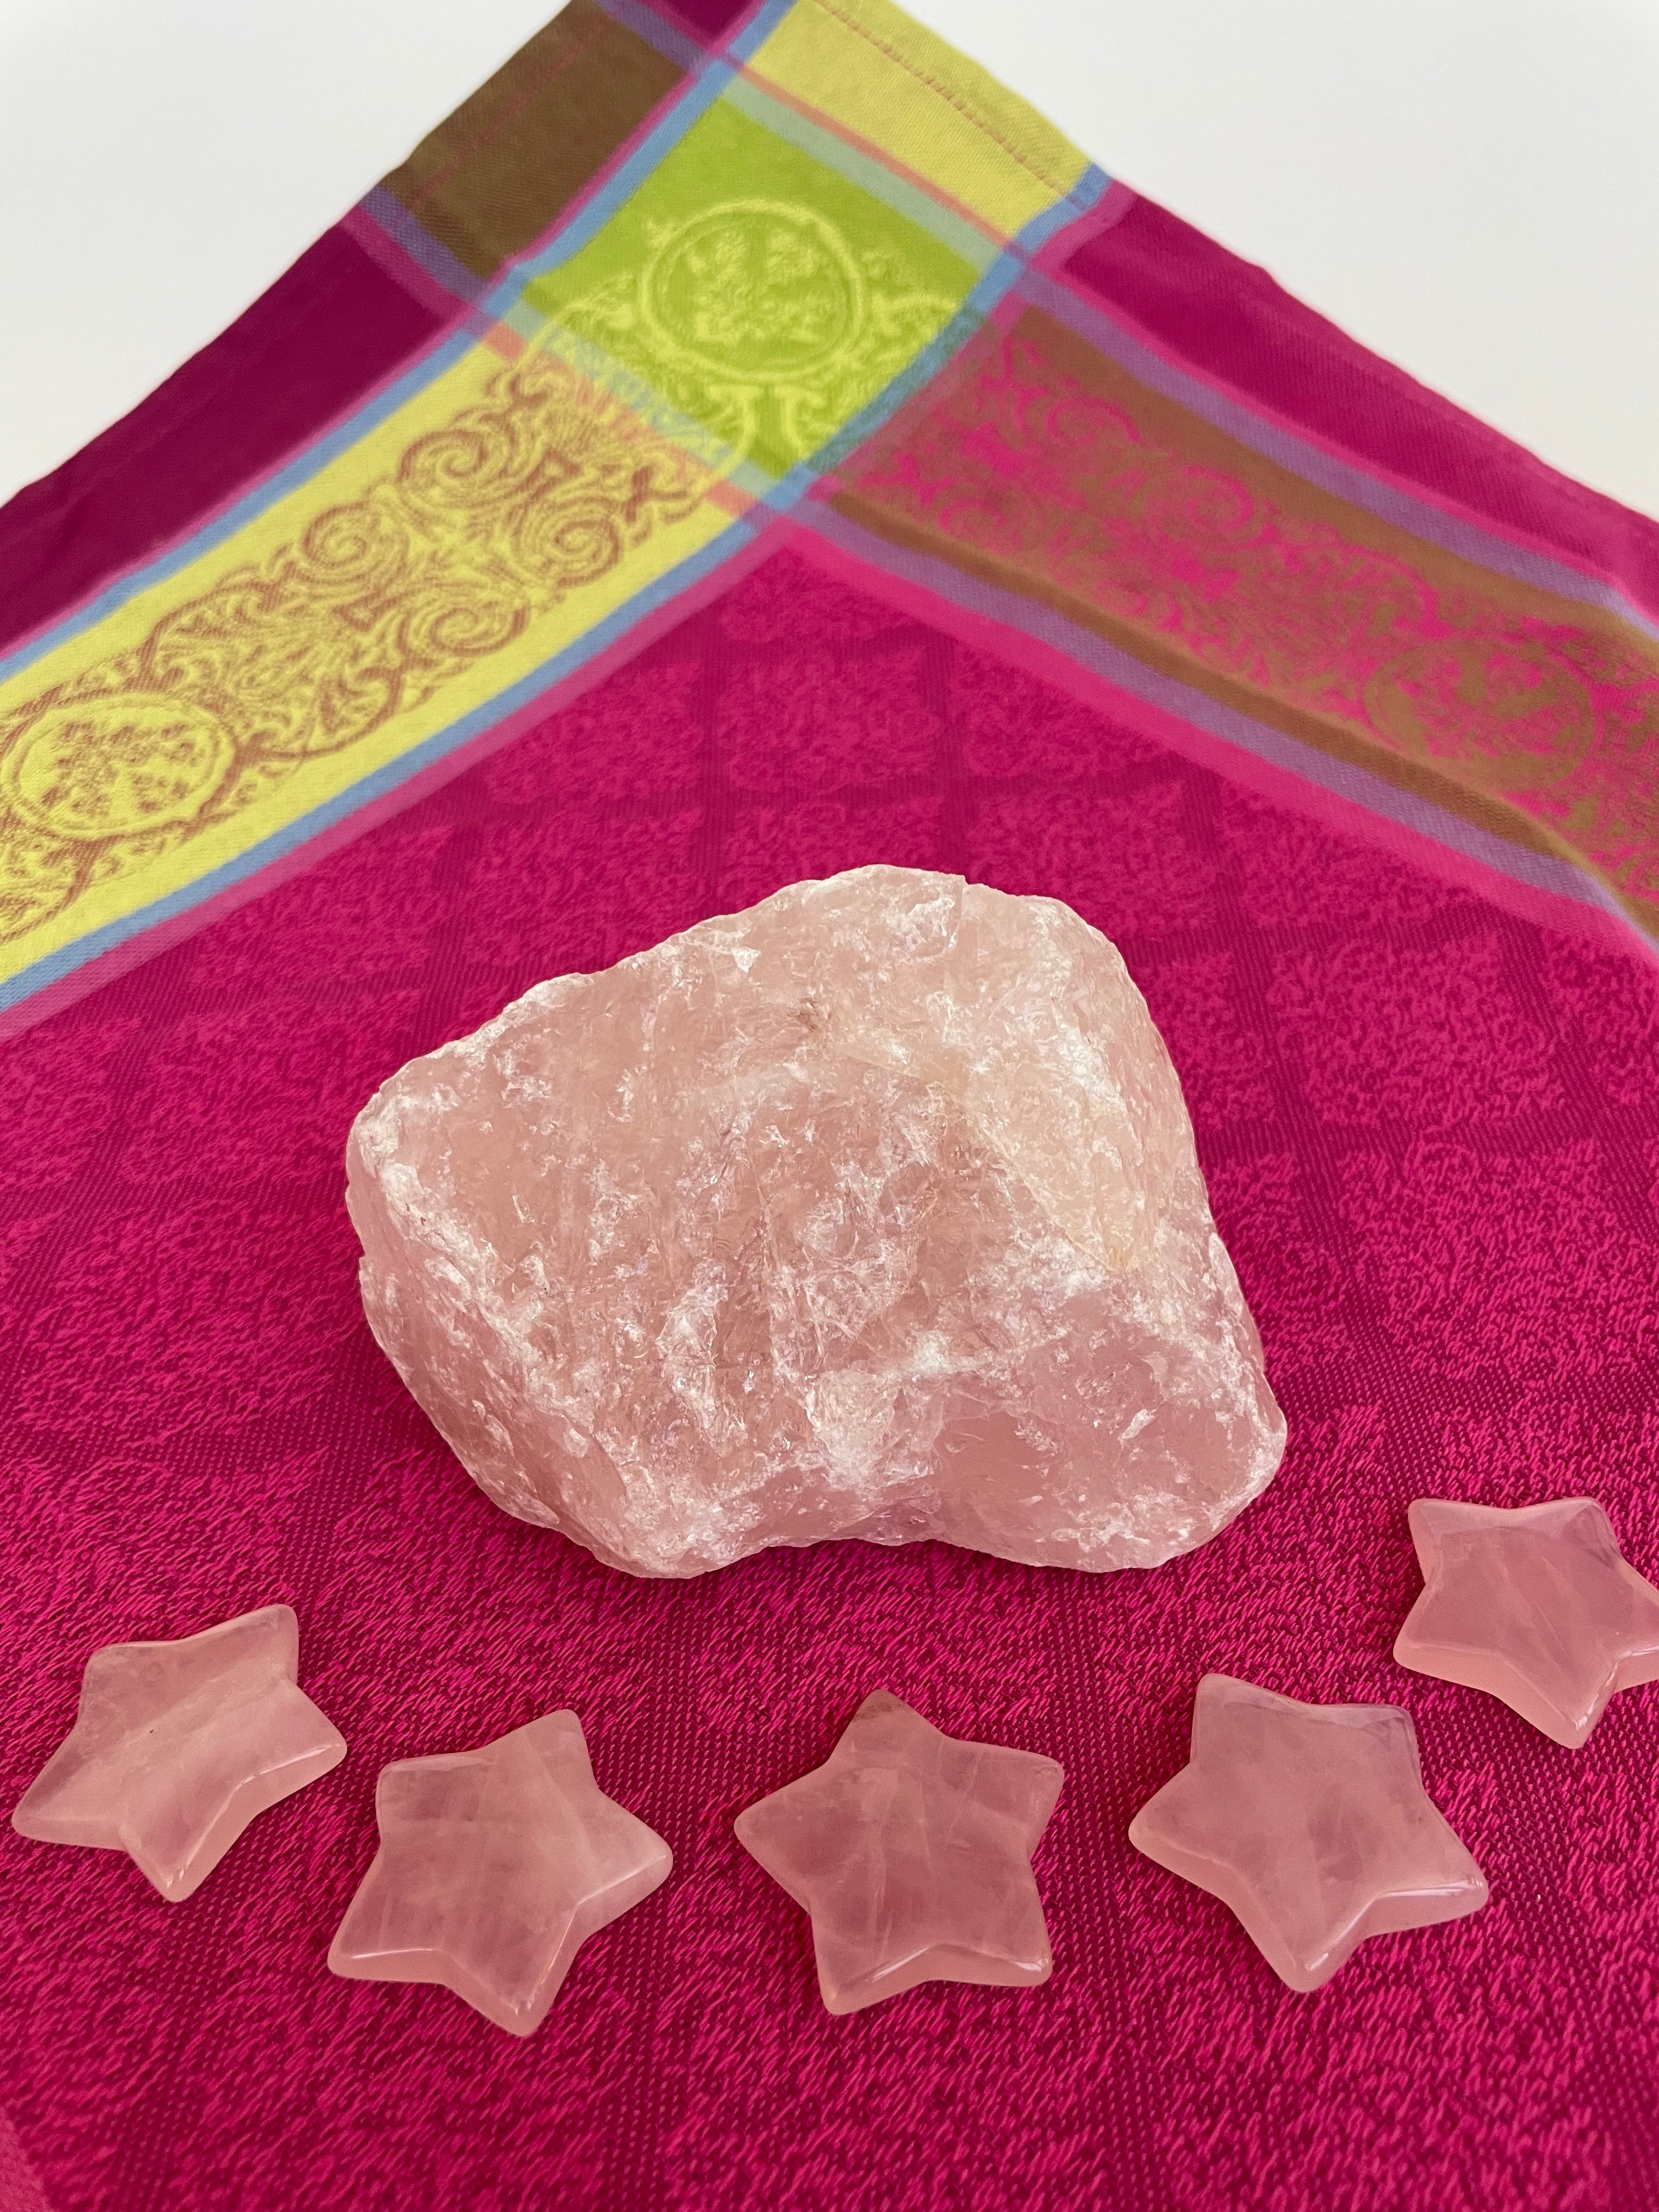 View of several rose quartz stars. This sweet little rose quartz crystal star can be used for meditation, healing, as an altar piece or as décor for any room in your home or office. Makes a wonderful gift too! Easy to slip right into your pocket so you can take the energy of rose quartz wherever you go! Rose quartz is the "stone of unconditional love & infinite peace." (Judy Hall). Approx. 1¼". Cost is $6 for one star. 